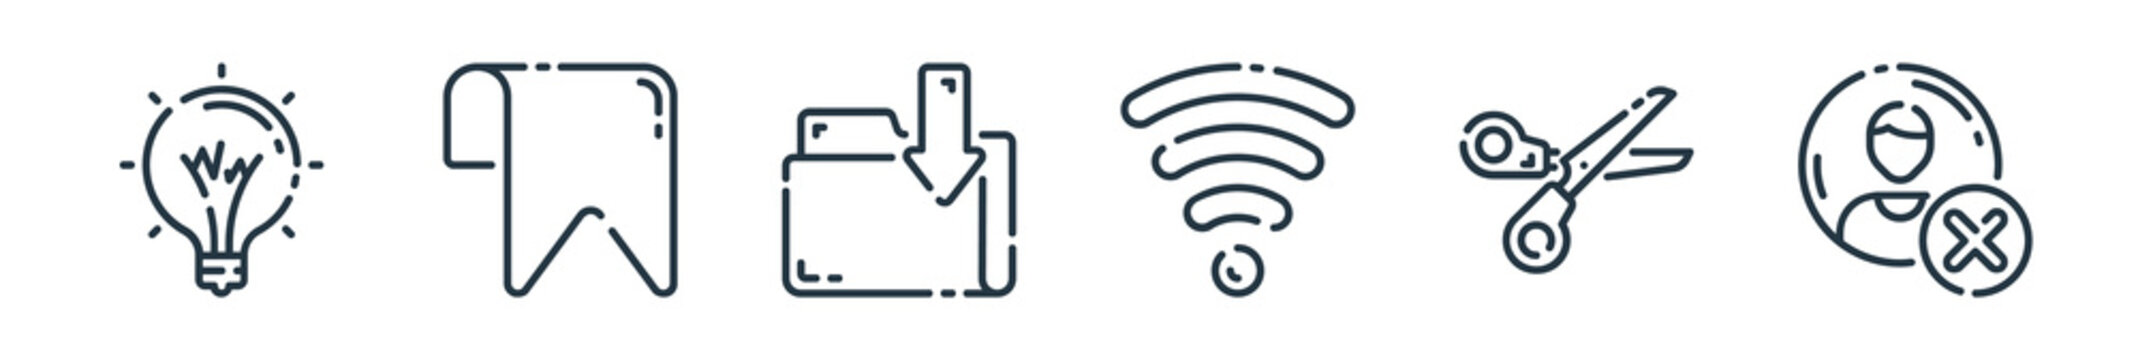 outline set of user interface line icons. linear vector icons such as idea, bookmark, folder, wifi, scissors, delete account. vector illustration.